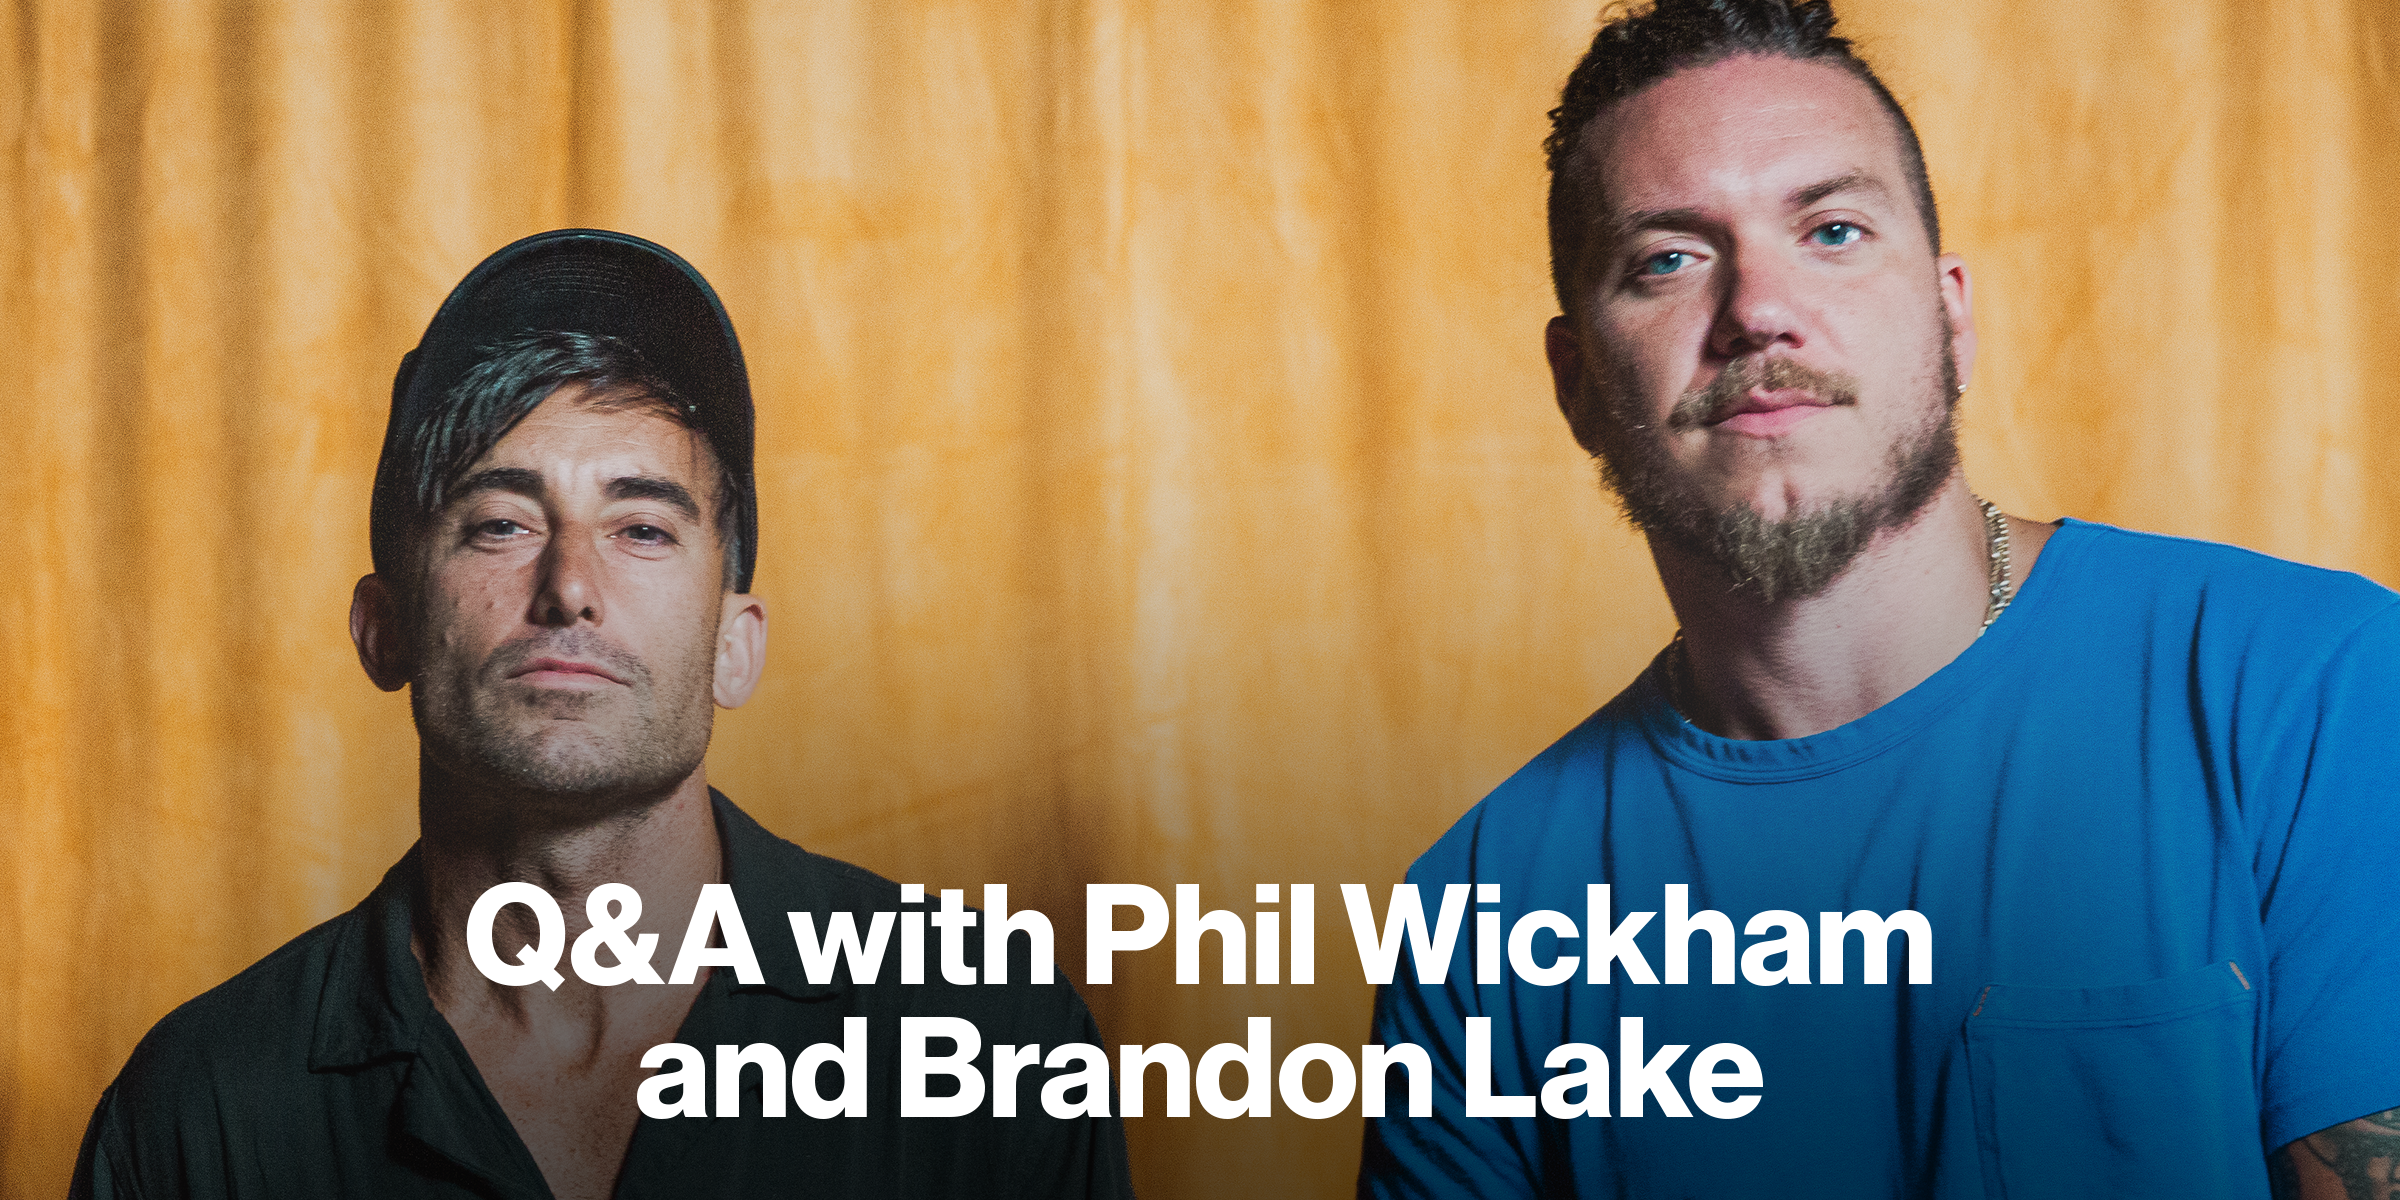 Q&A with Phil Wickham and Brandon Lake